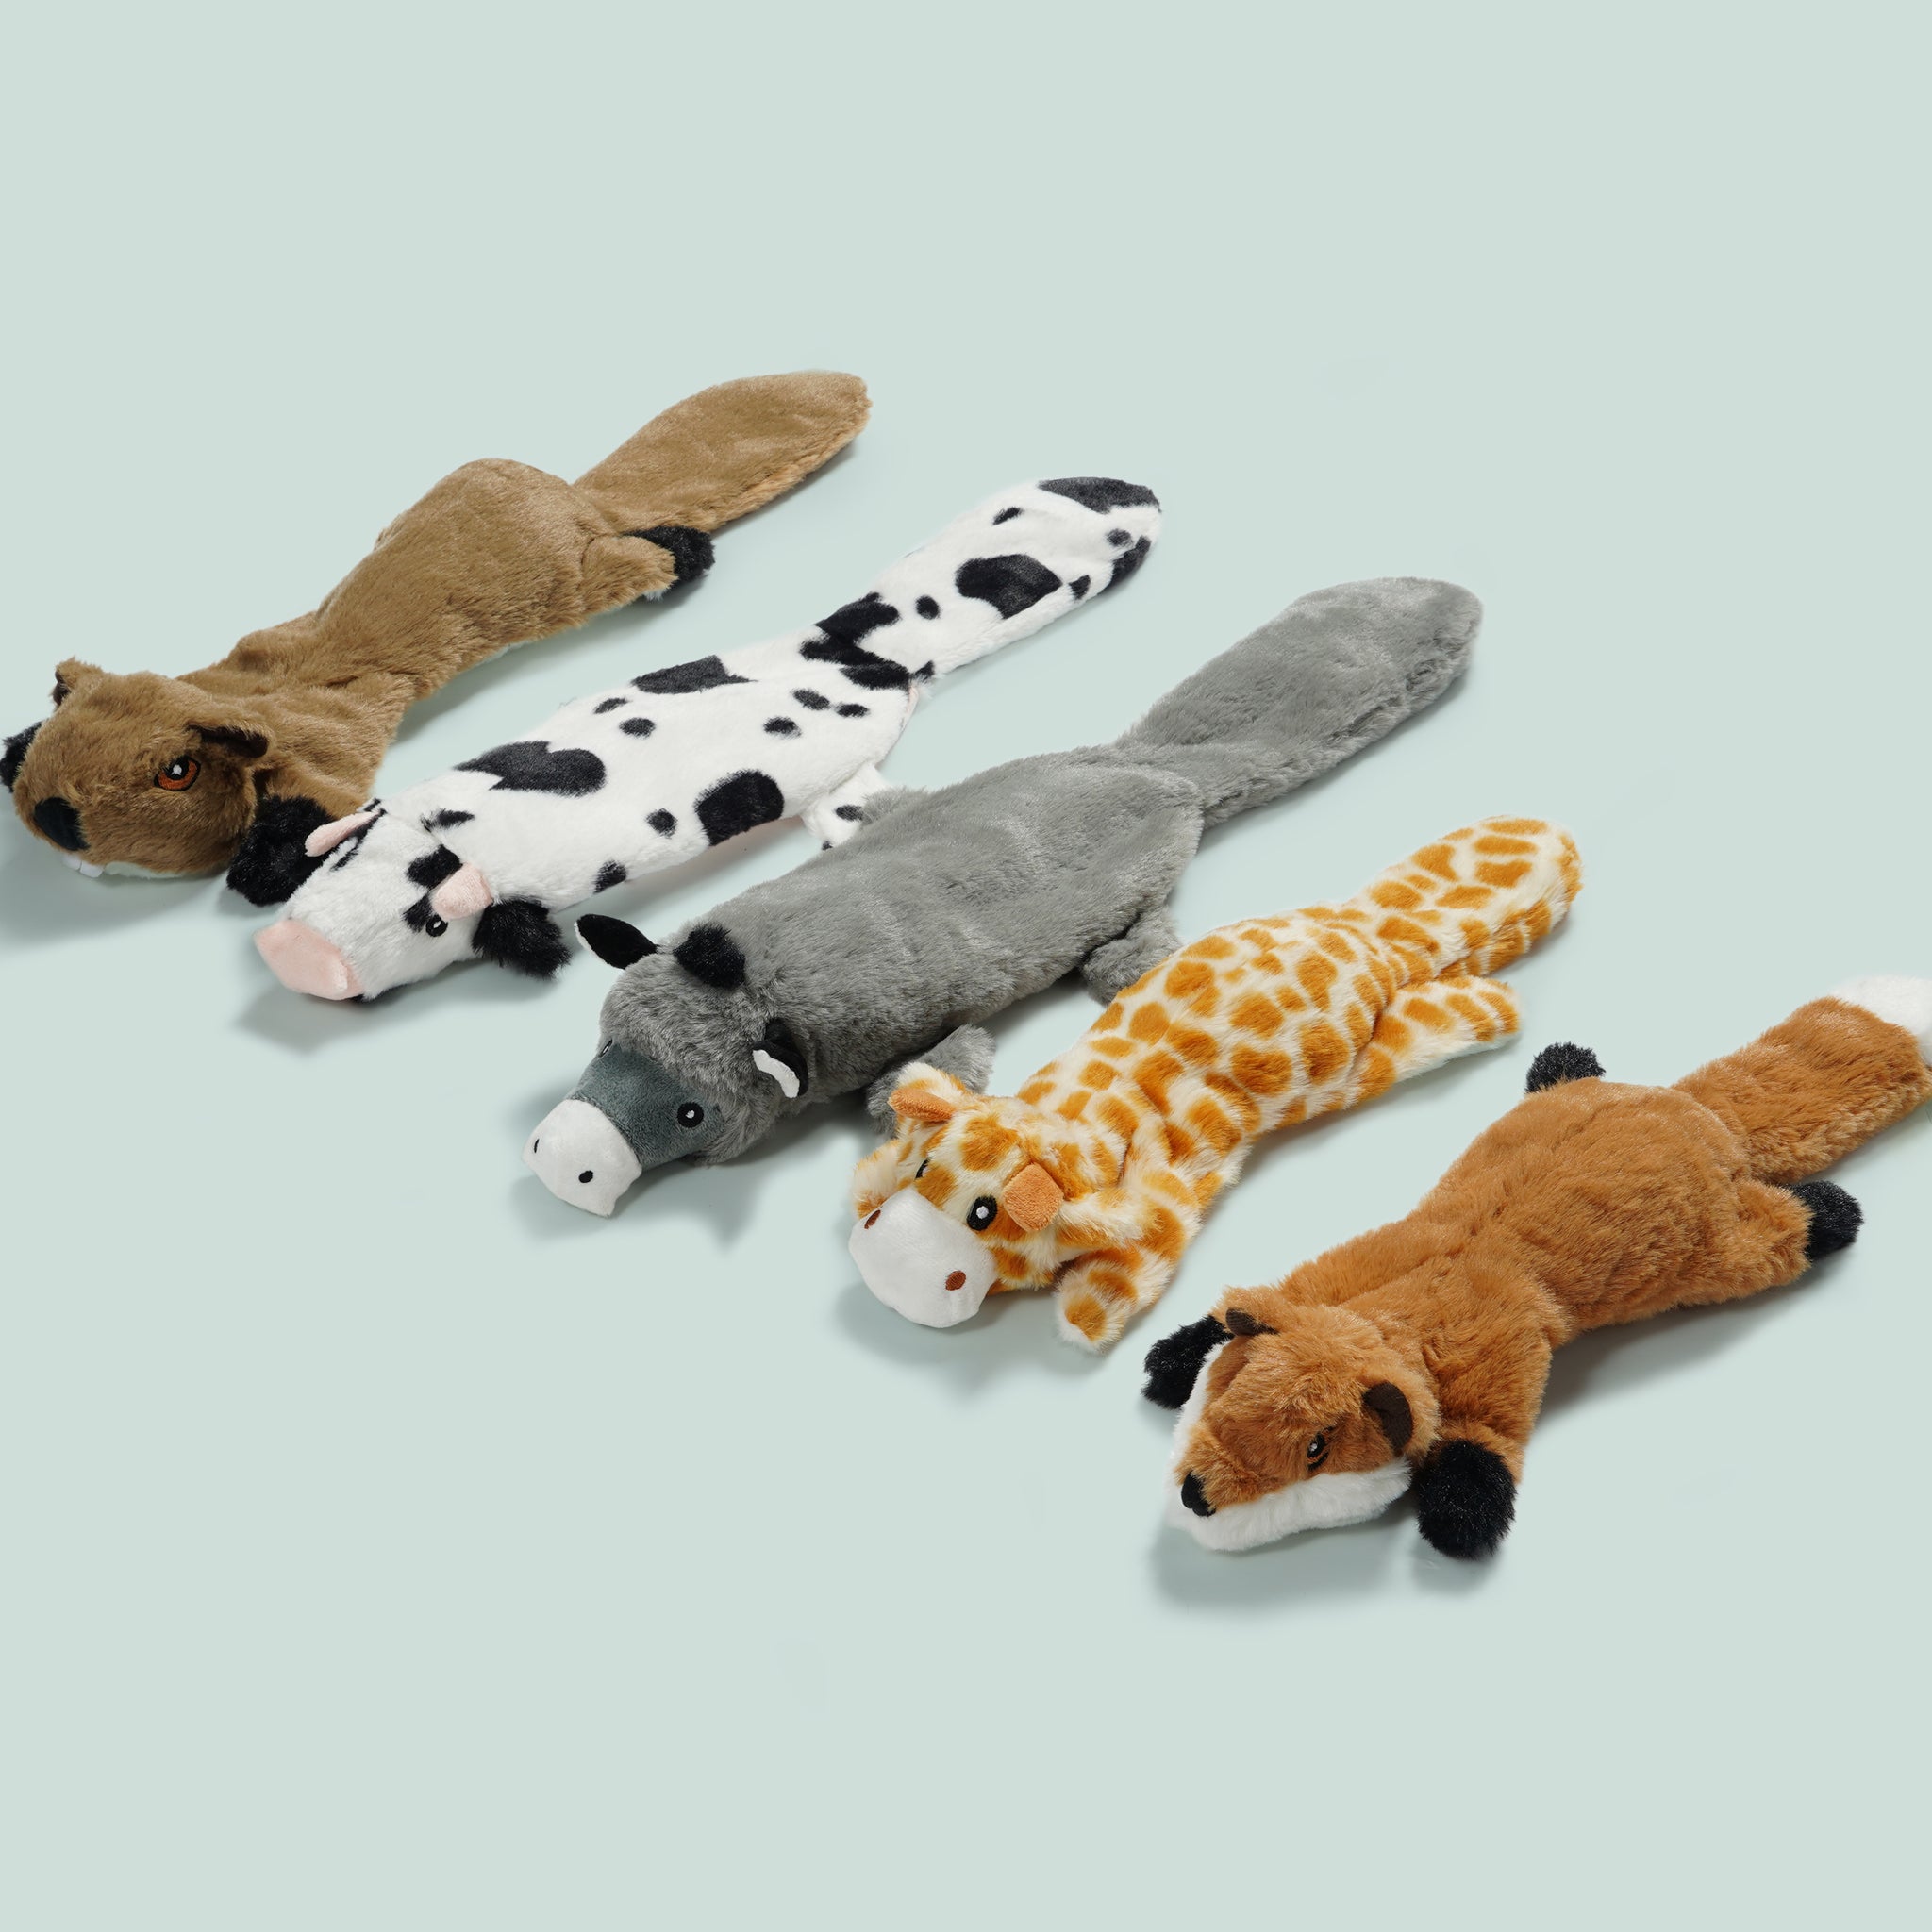 Stuffed Dog Toys for Large Dogs - Big Dog Squeaky Toys, Plush Dog Toys for  Bored